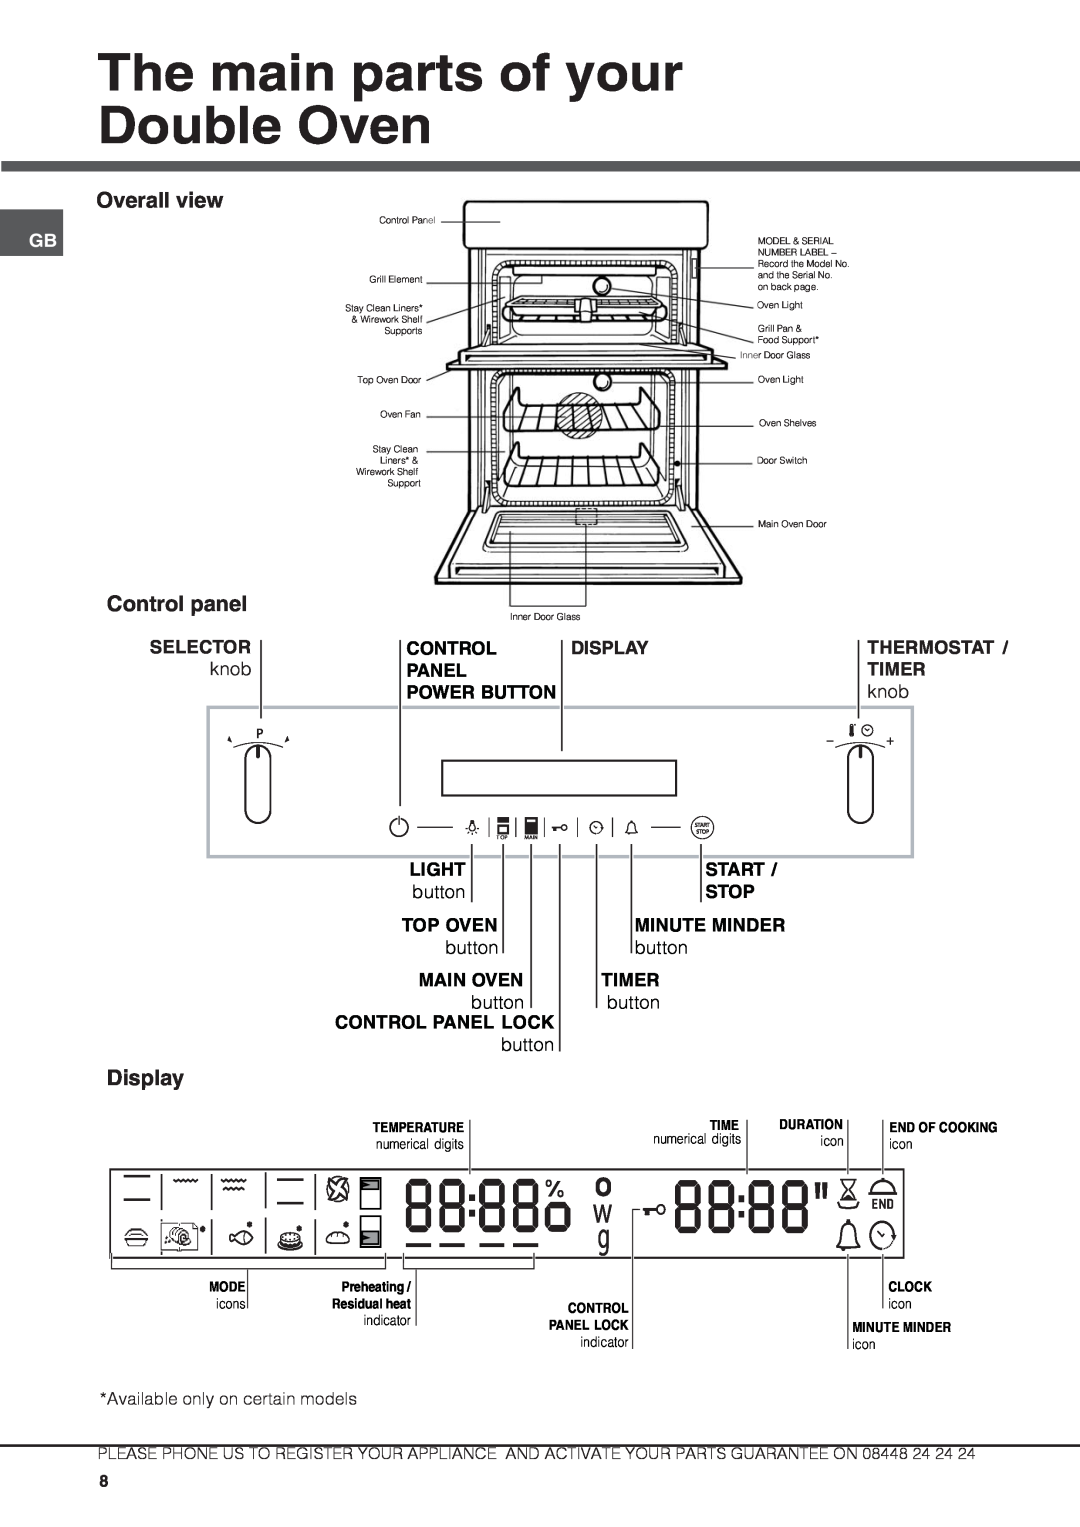 Hotpoint DX 892 CX S The main parts of your Double Oven, Overall view, Control panel, Display, Selector, knob, Panel, Time 